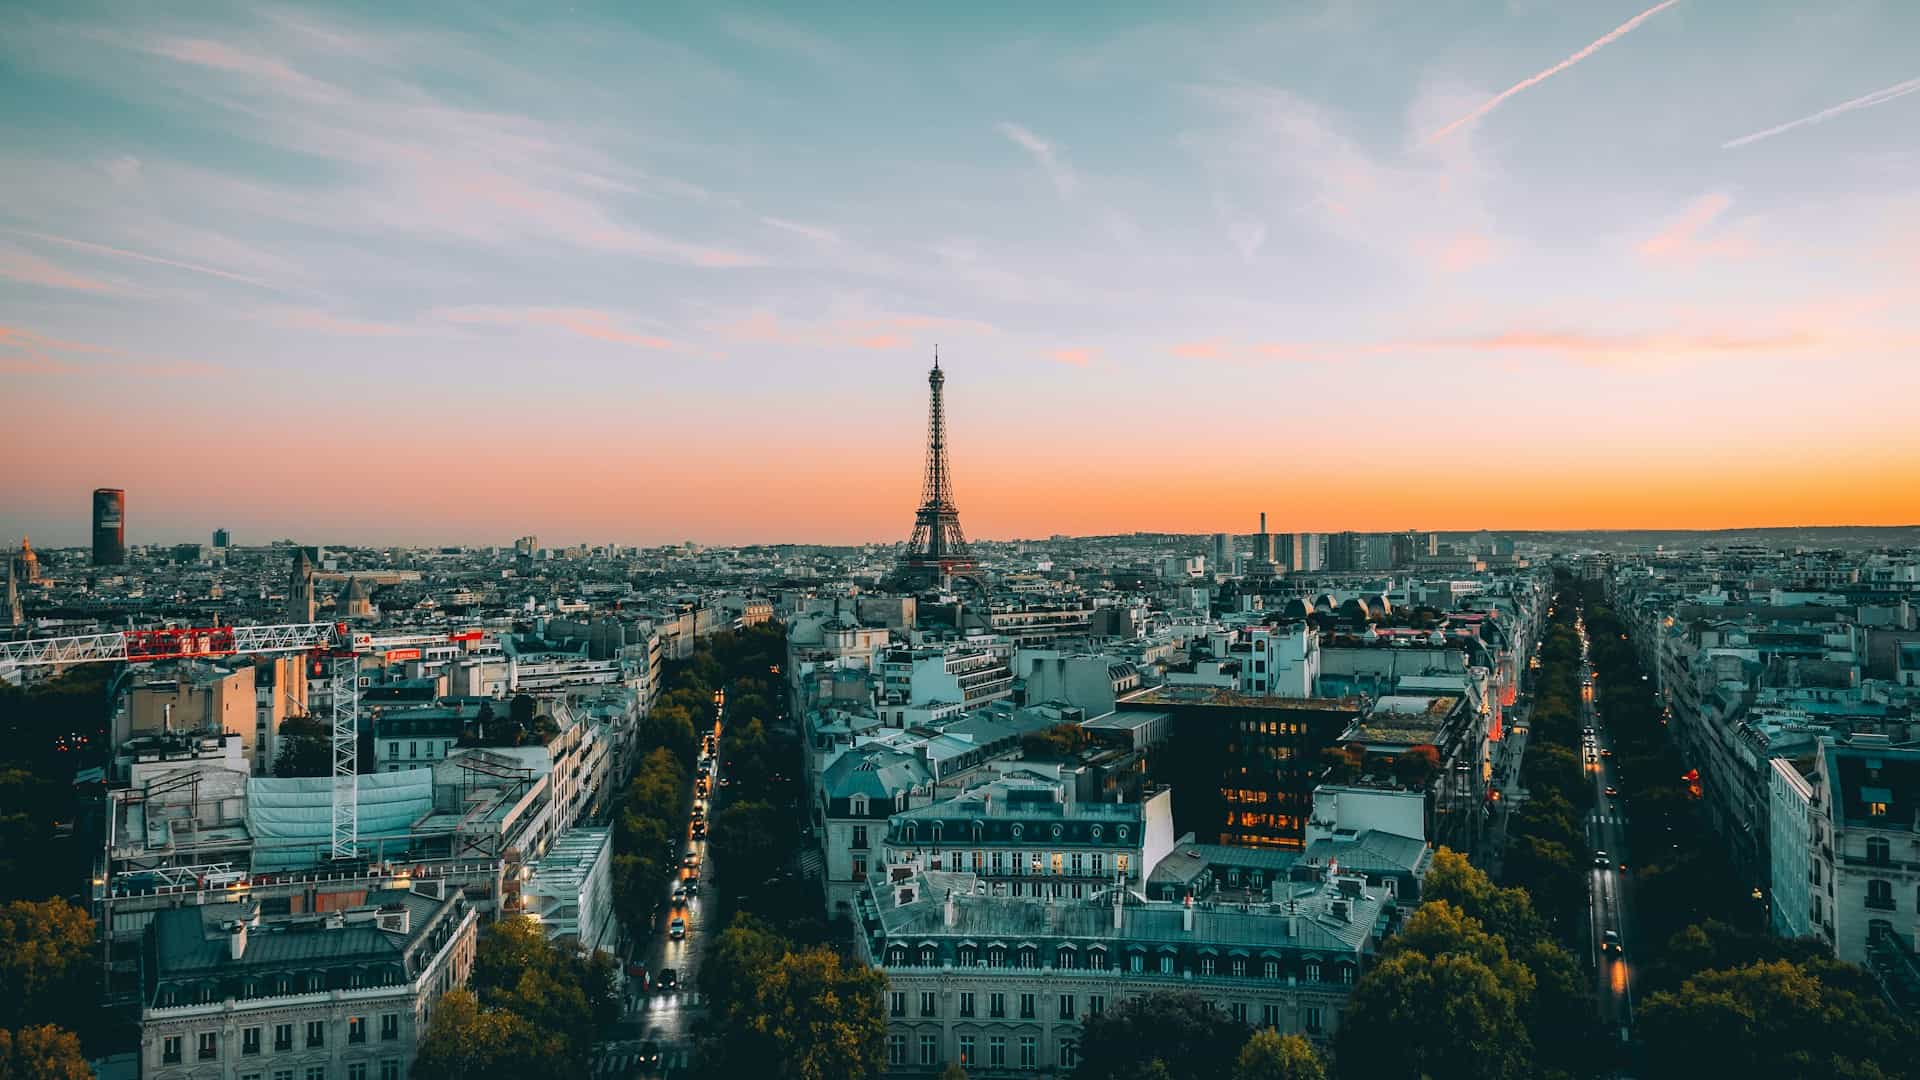 City view of Paris at sunset with the Eiffel Tower